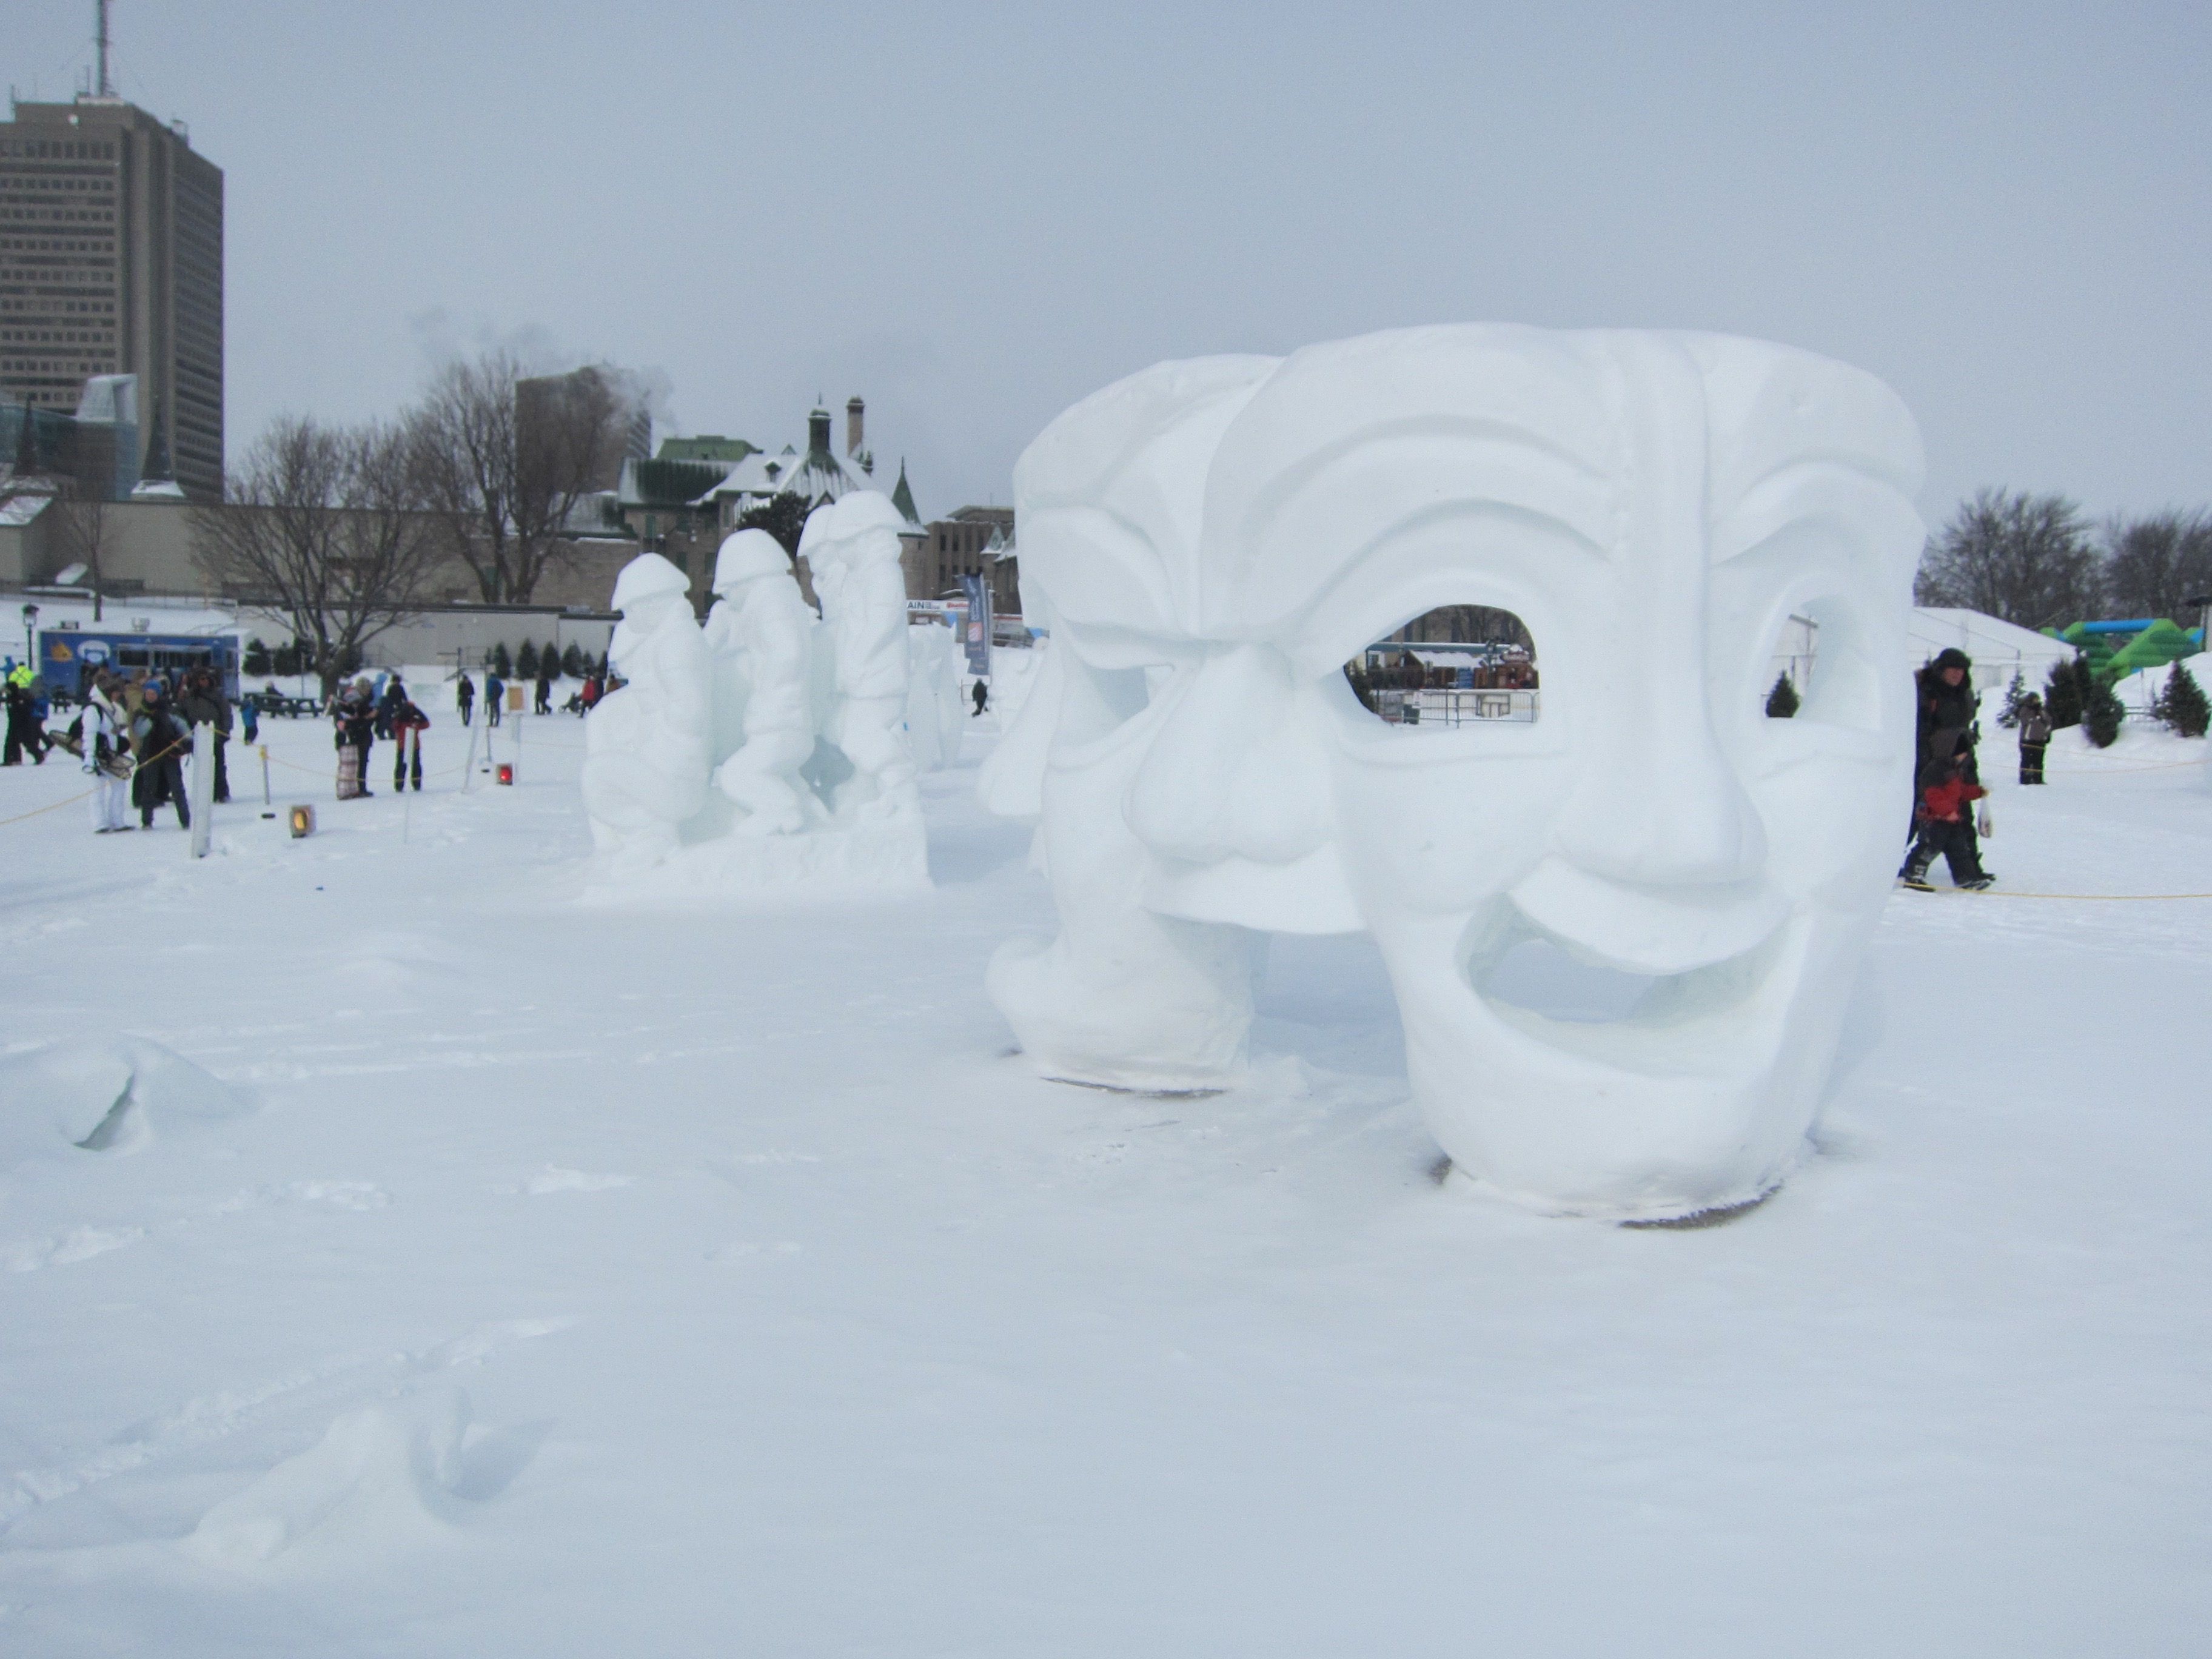 Quebec City Winter Carnival and Ice Festival, Quebec City, Canada